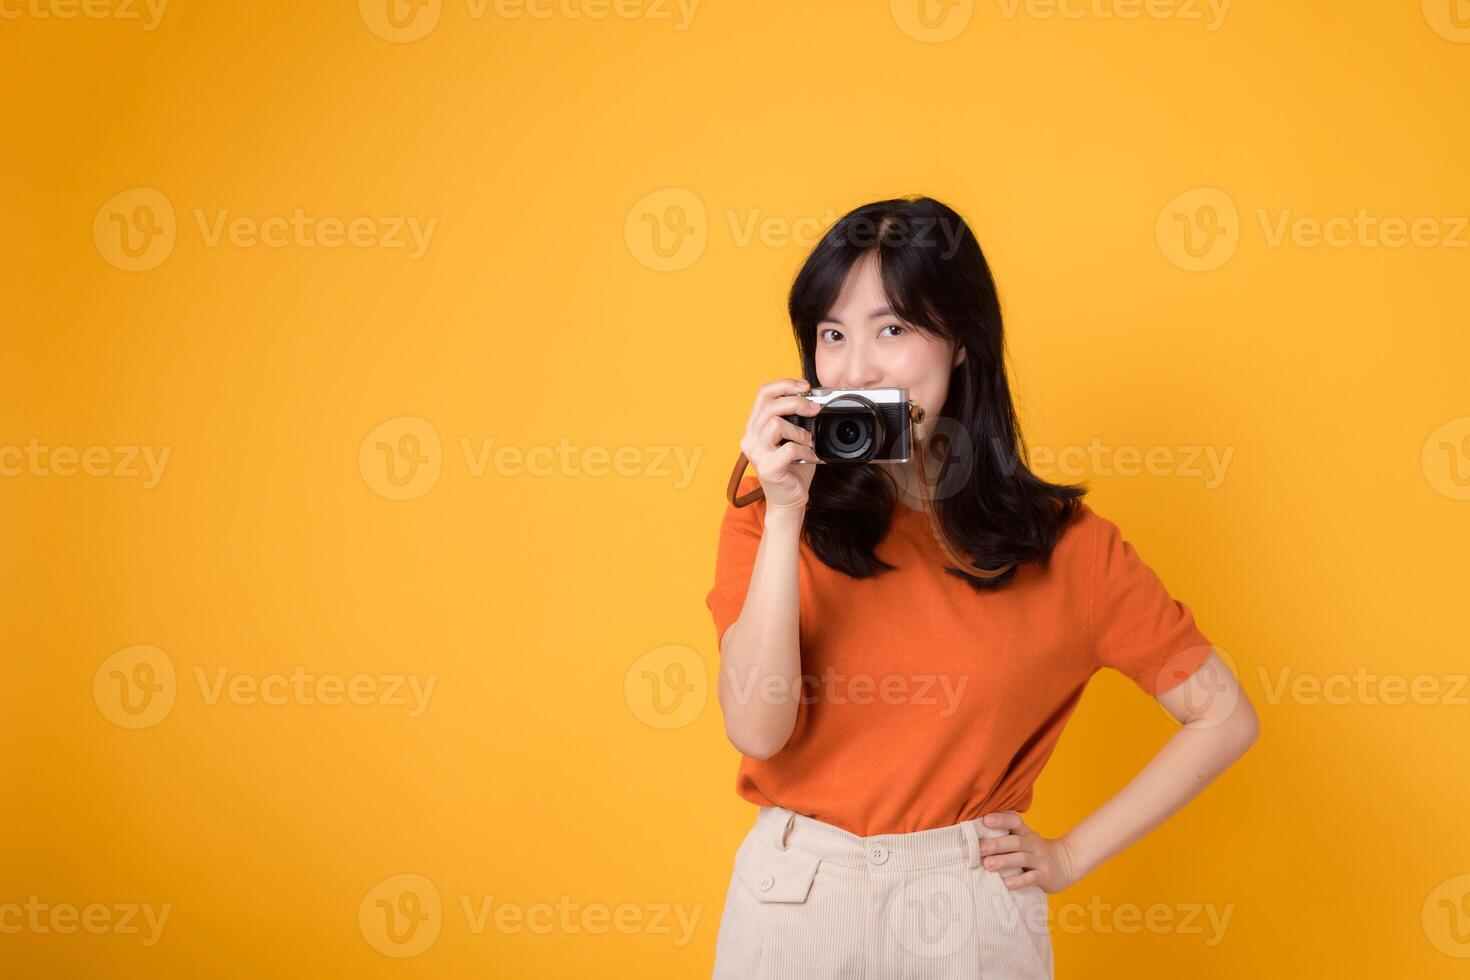 Young woman with a camera capturing memories on a fun holiday trip. Adventure and photography concept. photo